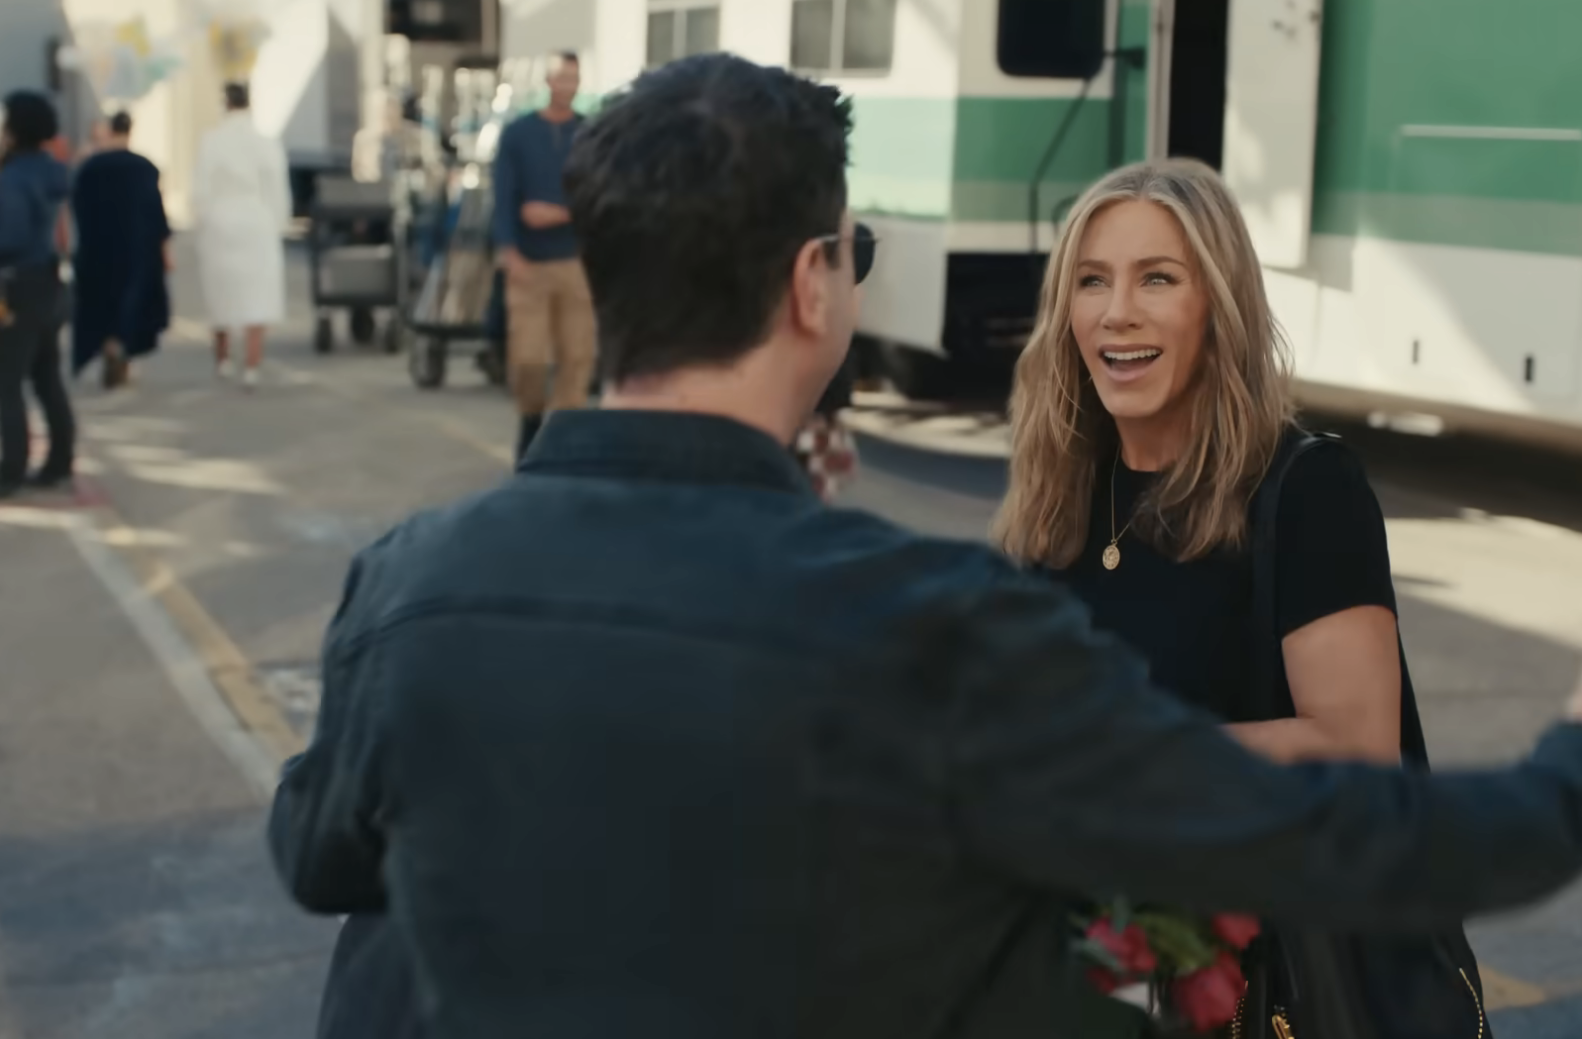 Jennifer smiling but clearly not knowing who David is in a scene from the  Uber Eats commercial